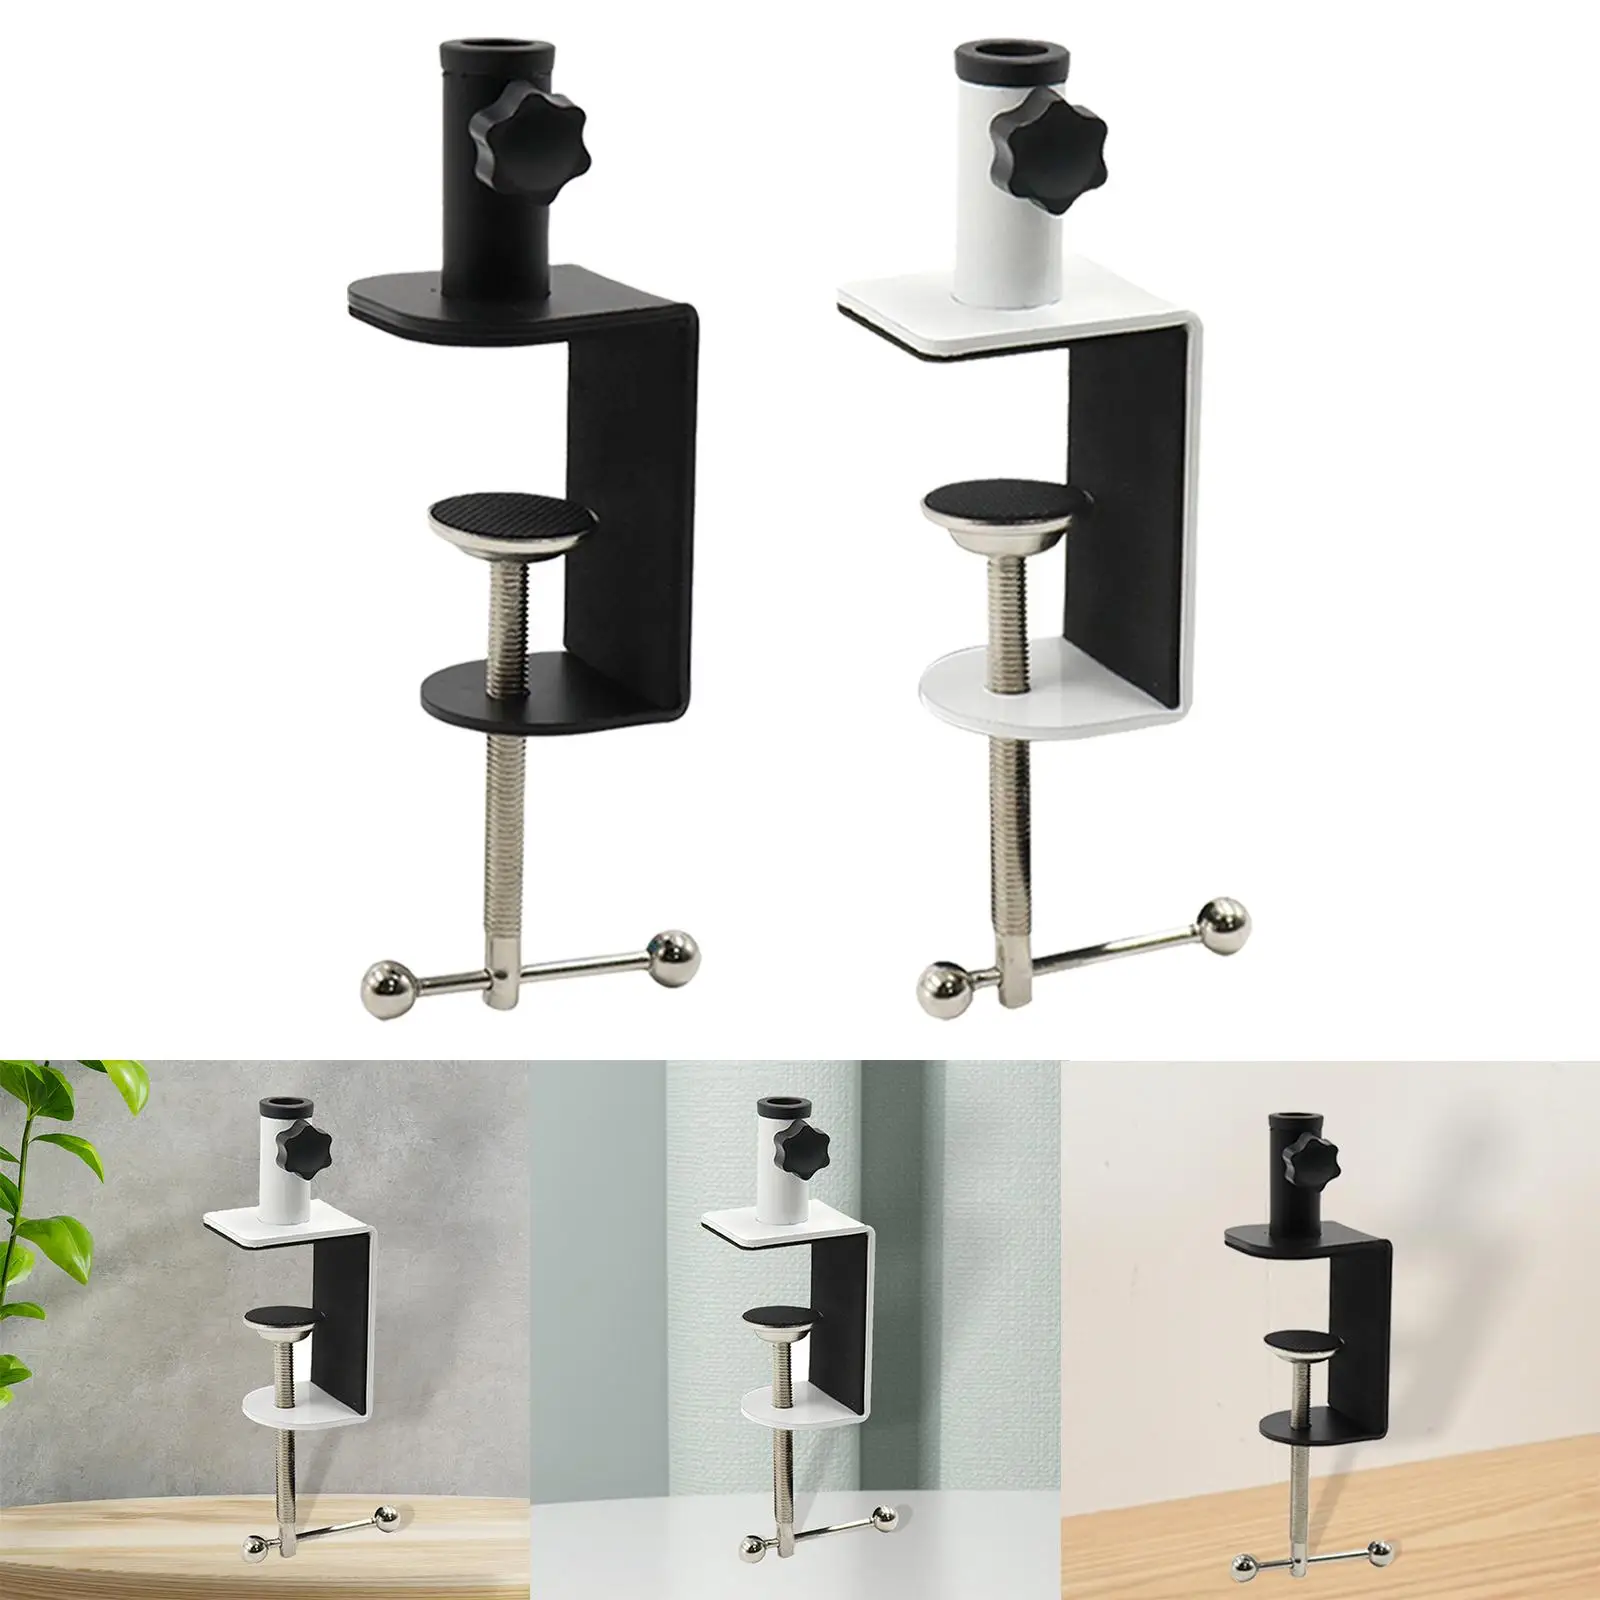 Desk Table Mount Clamp with Adjustable Screw Protective Heavy Duty Stable Arm Stand for Microphone Monitor Desktop Lamp Cameras